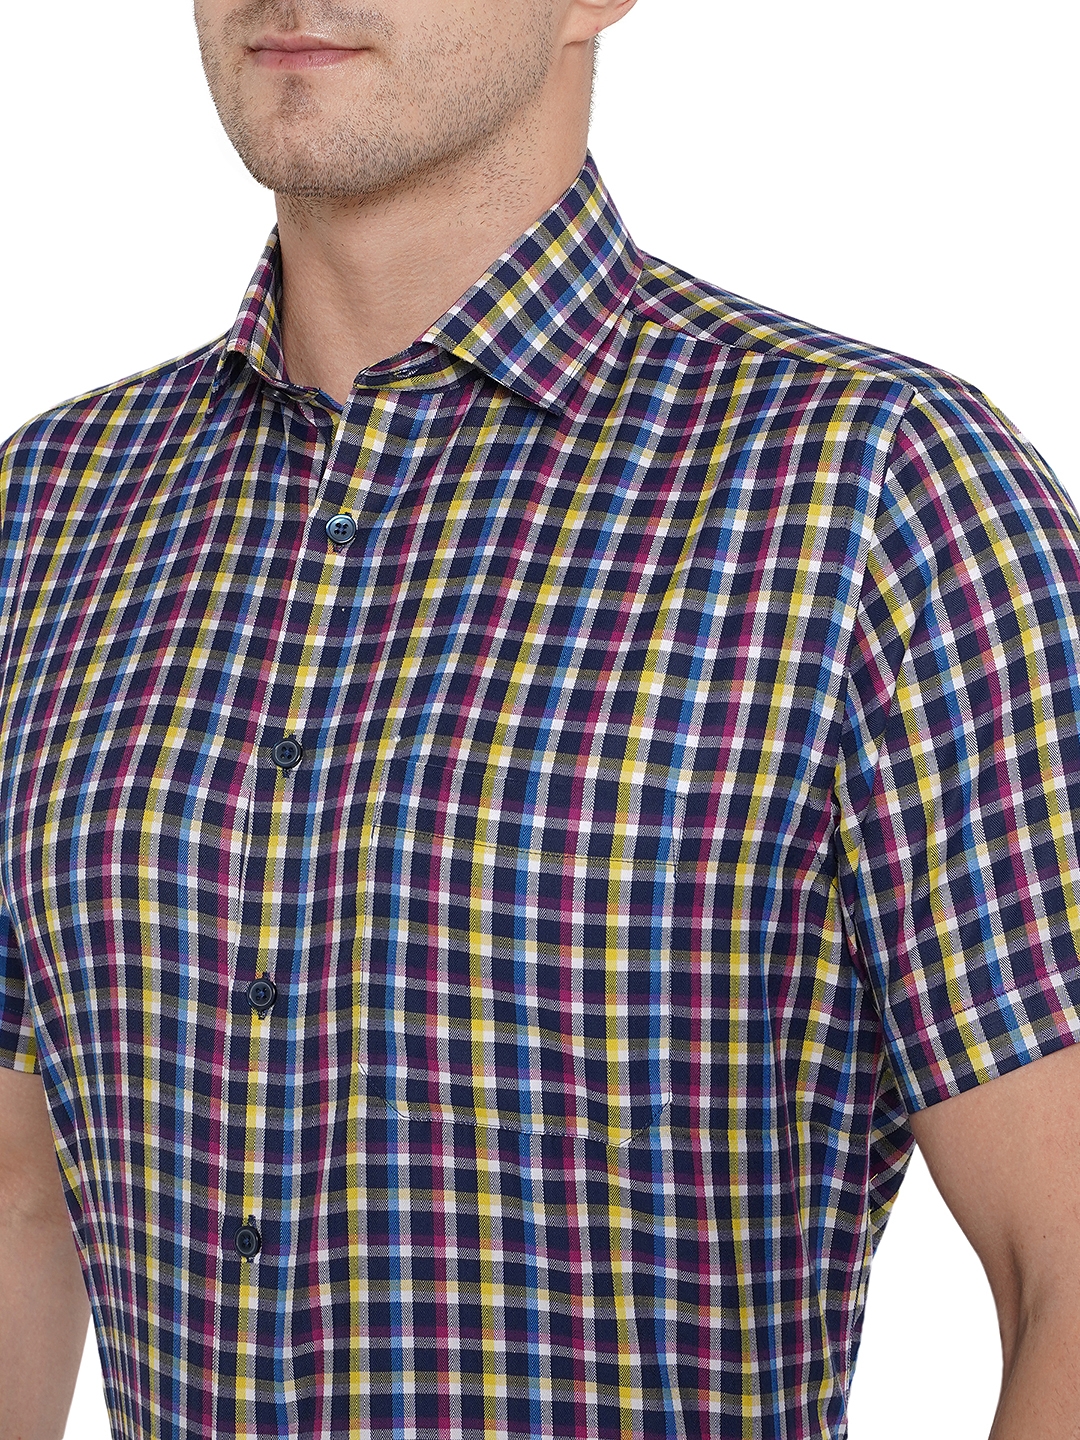 Greenfibre | White & Blue Checked Regular Fit Formal Shirt | Greenfibre 4